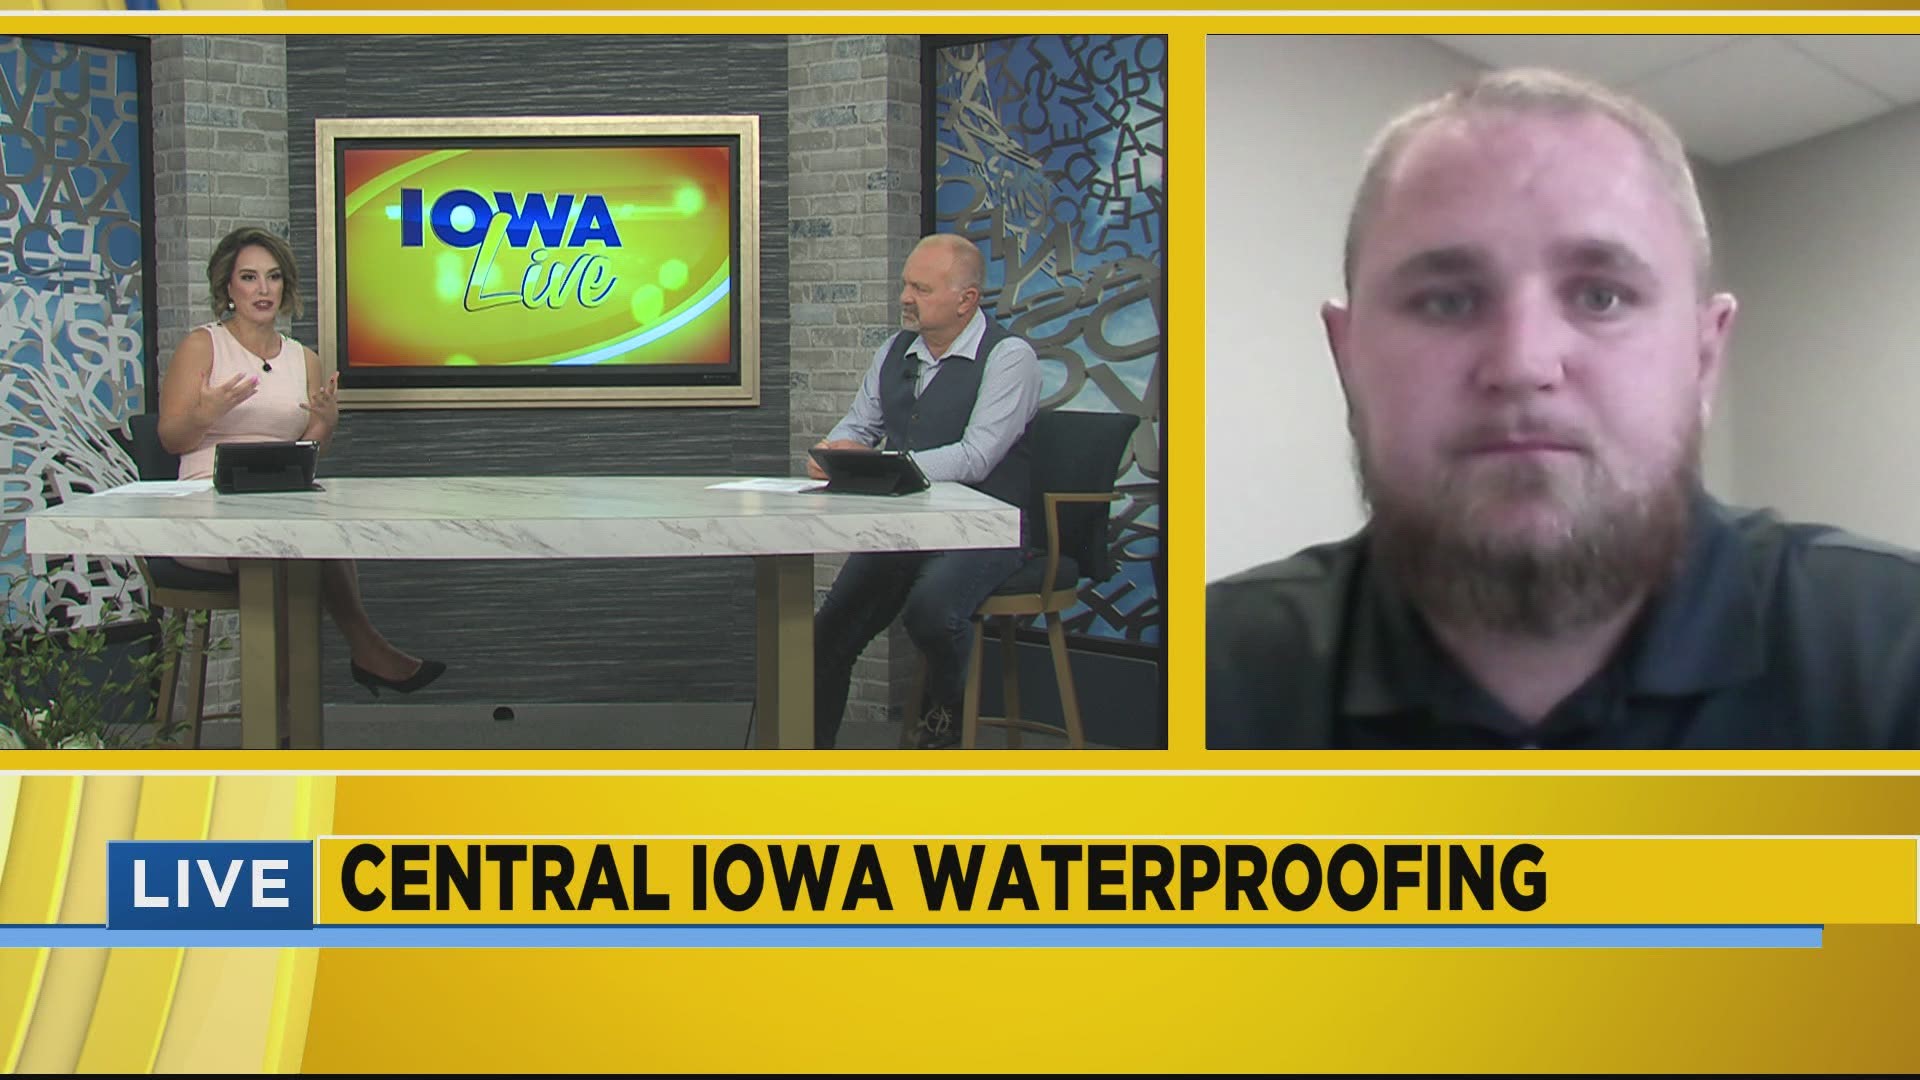 Lou and Jackie talk with Central Iowa Waterproofing and learn about their services